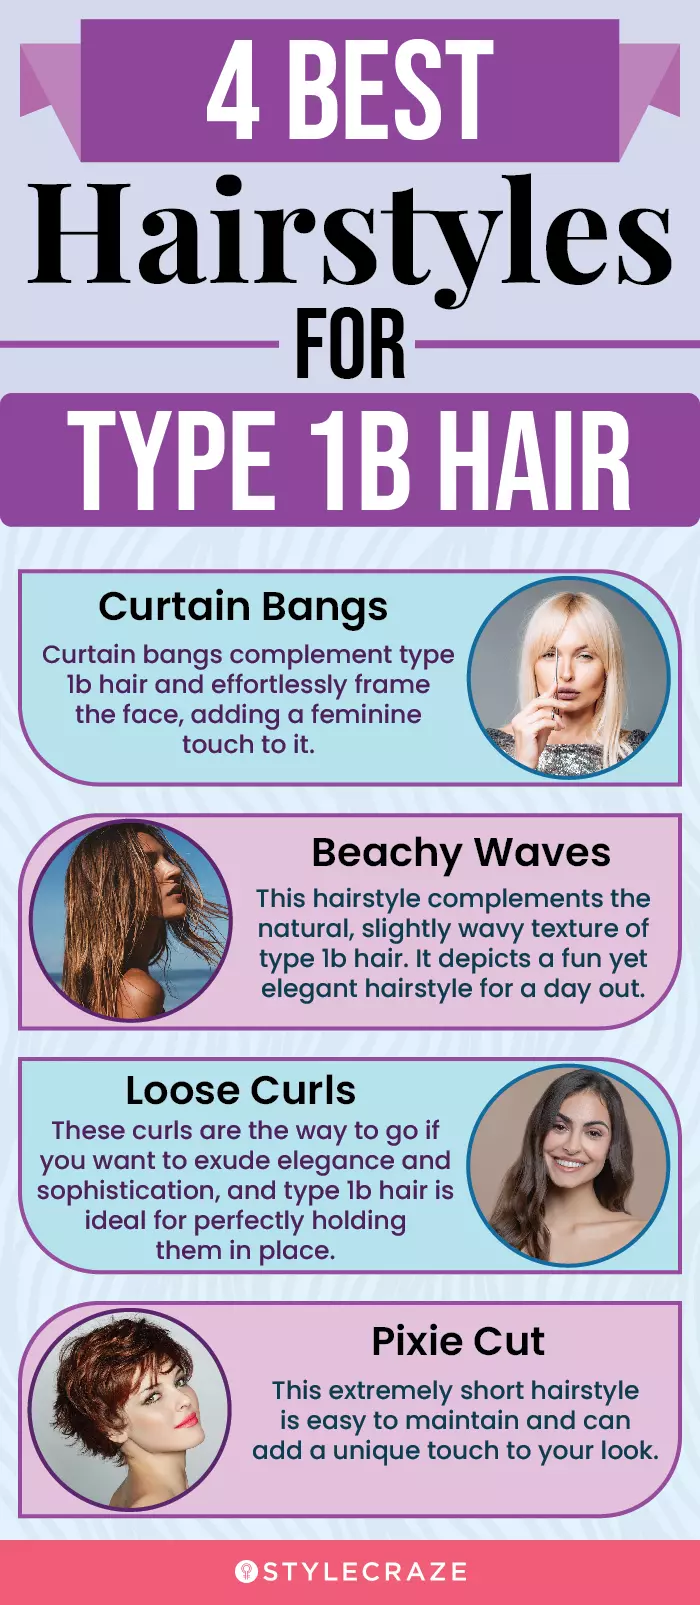 4 best hairstyles for type 1b hair (infographic)